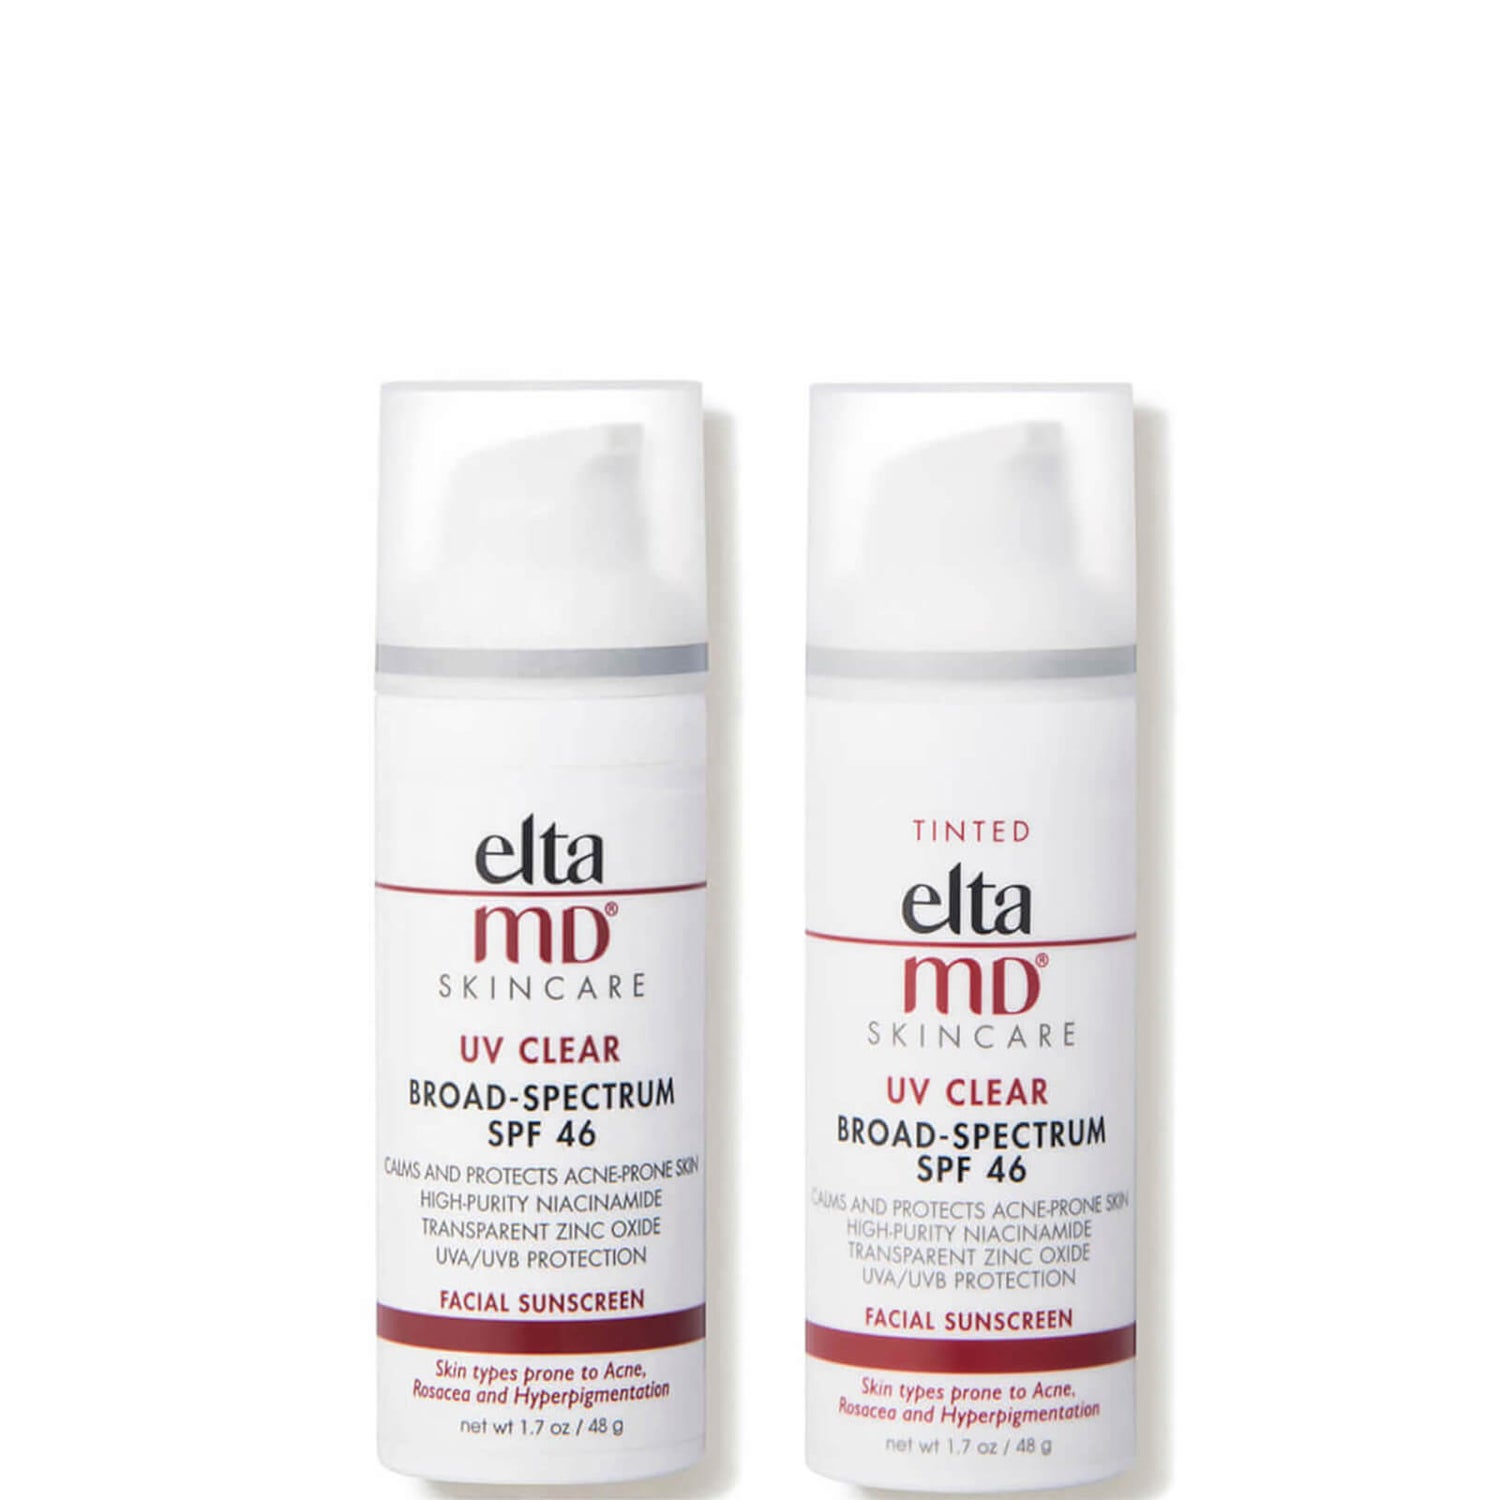 EltaMD Exclusive UV Clear Tinted and Untinted Duo (Worth $76.00)